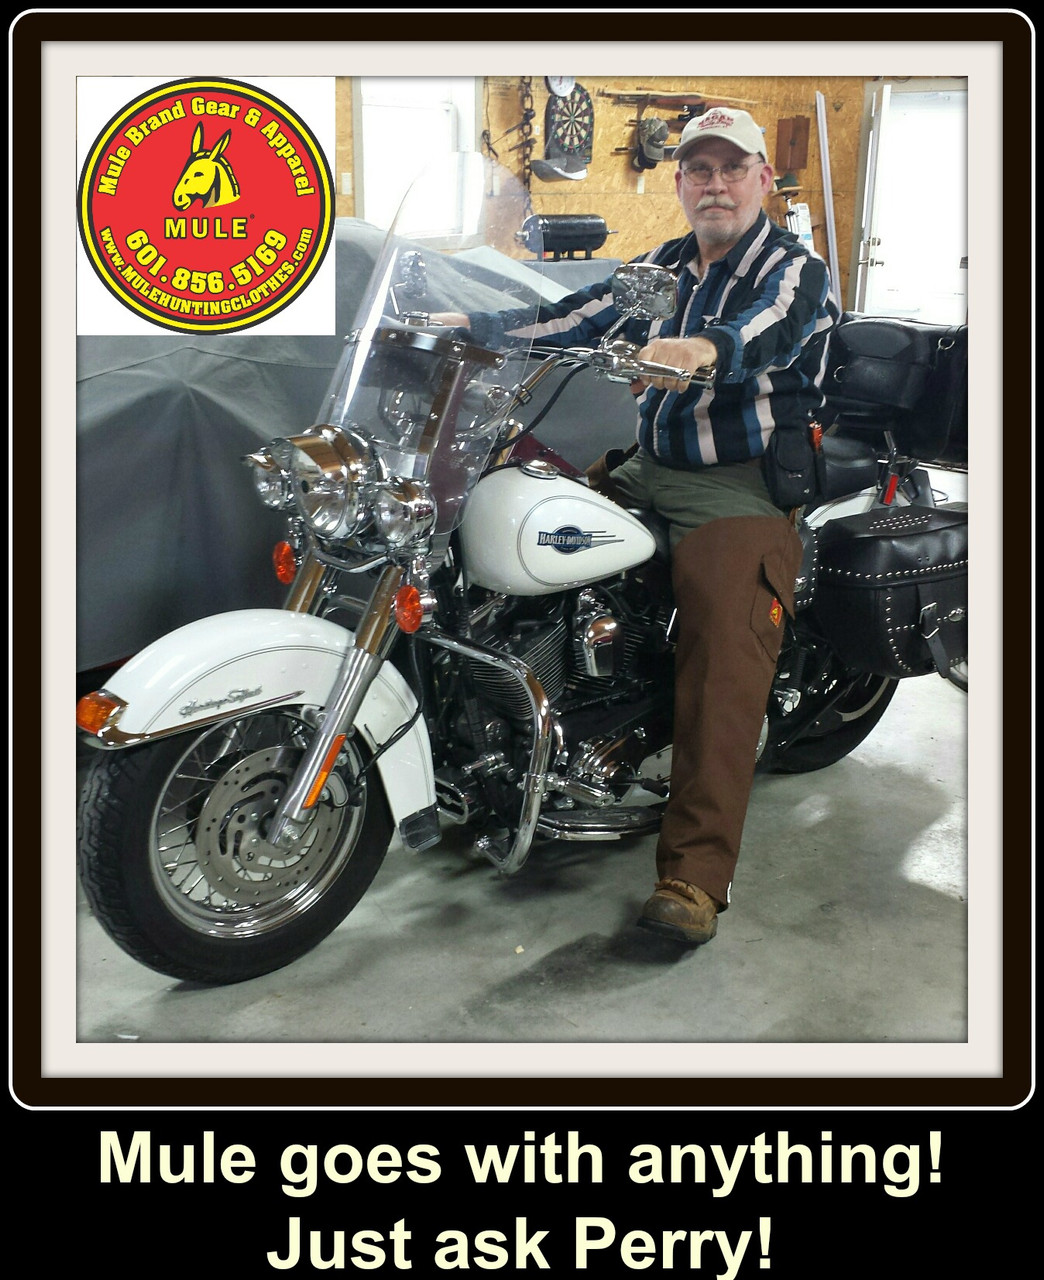 perry in mule chaps riding his motorcycle available at okie dog supply